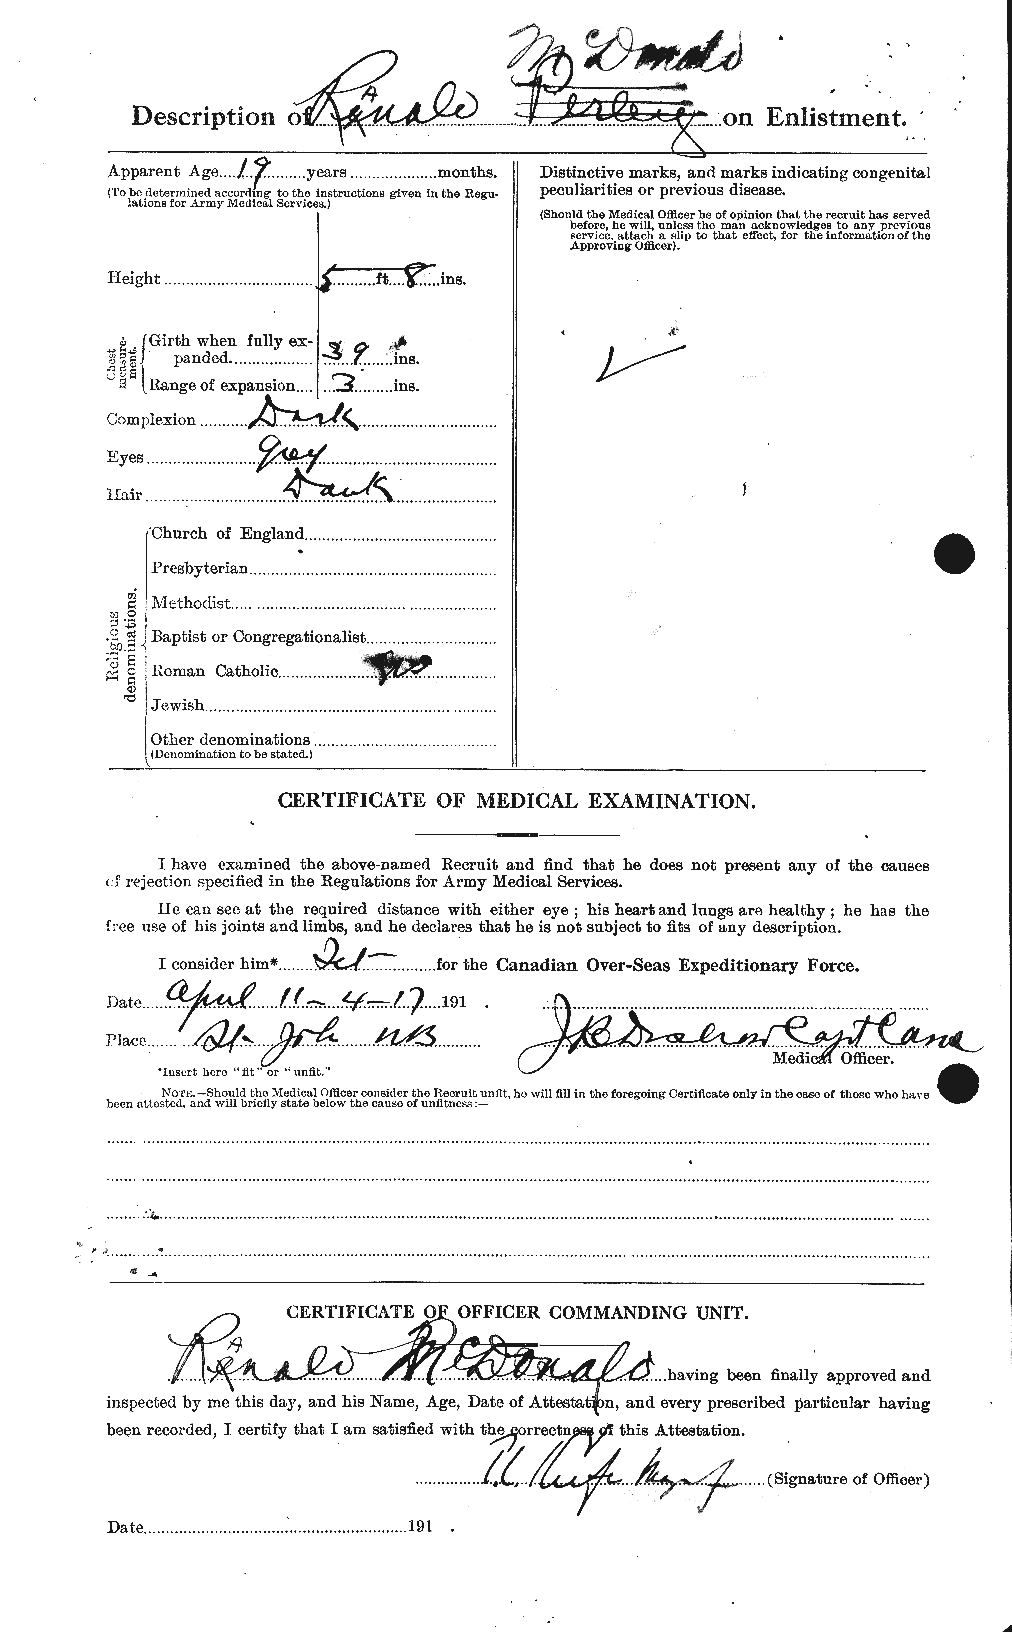 Personnel Records of the First World War - CEF 524803b